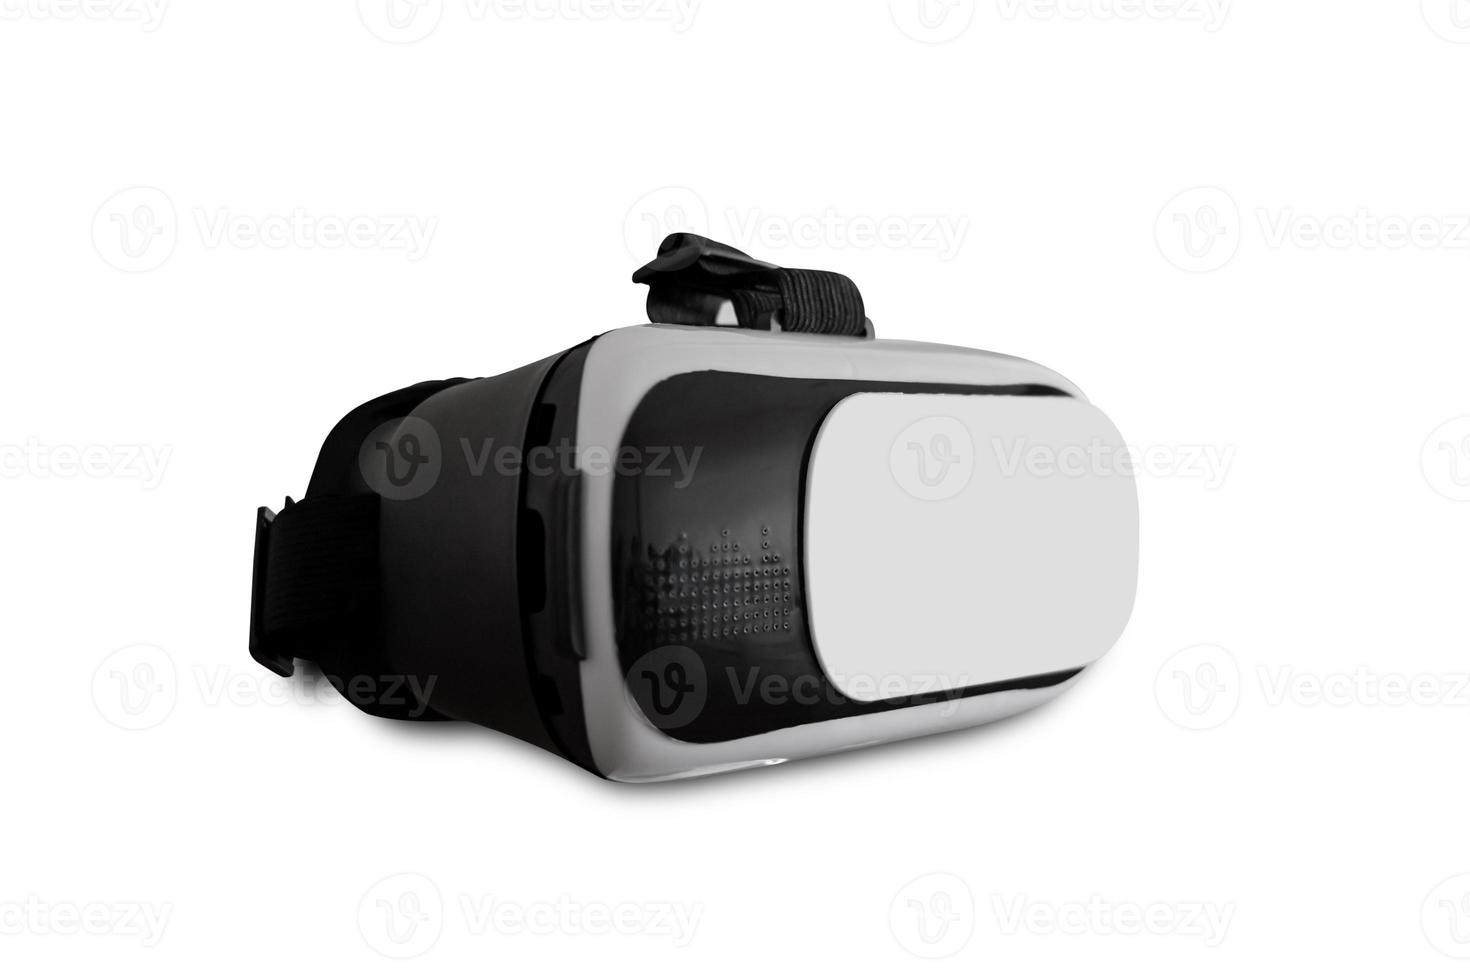 VR camera glasses smartphone isolated on a white background with clipping path. photo